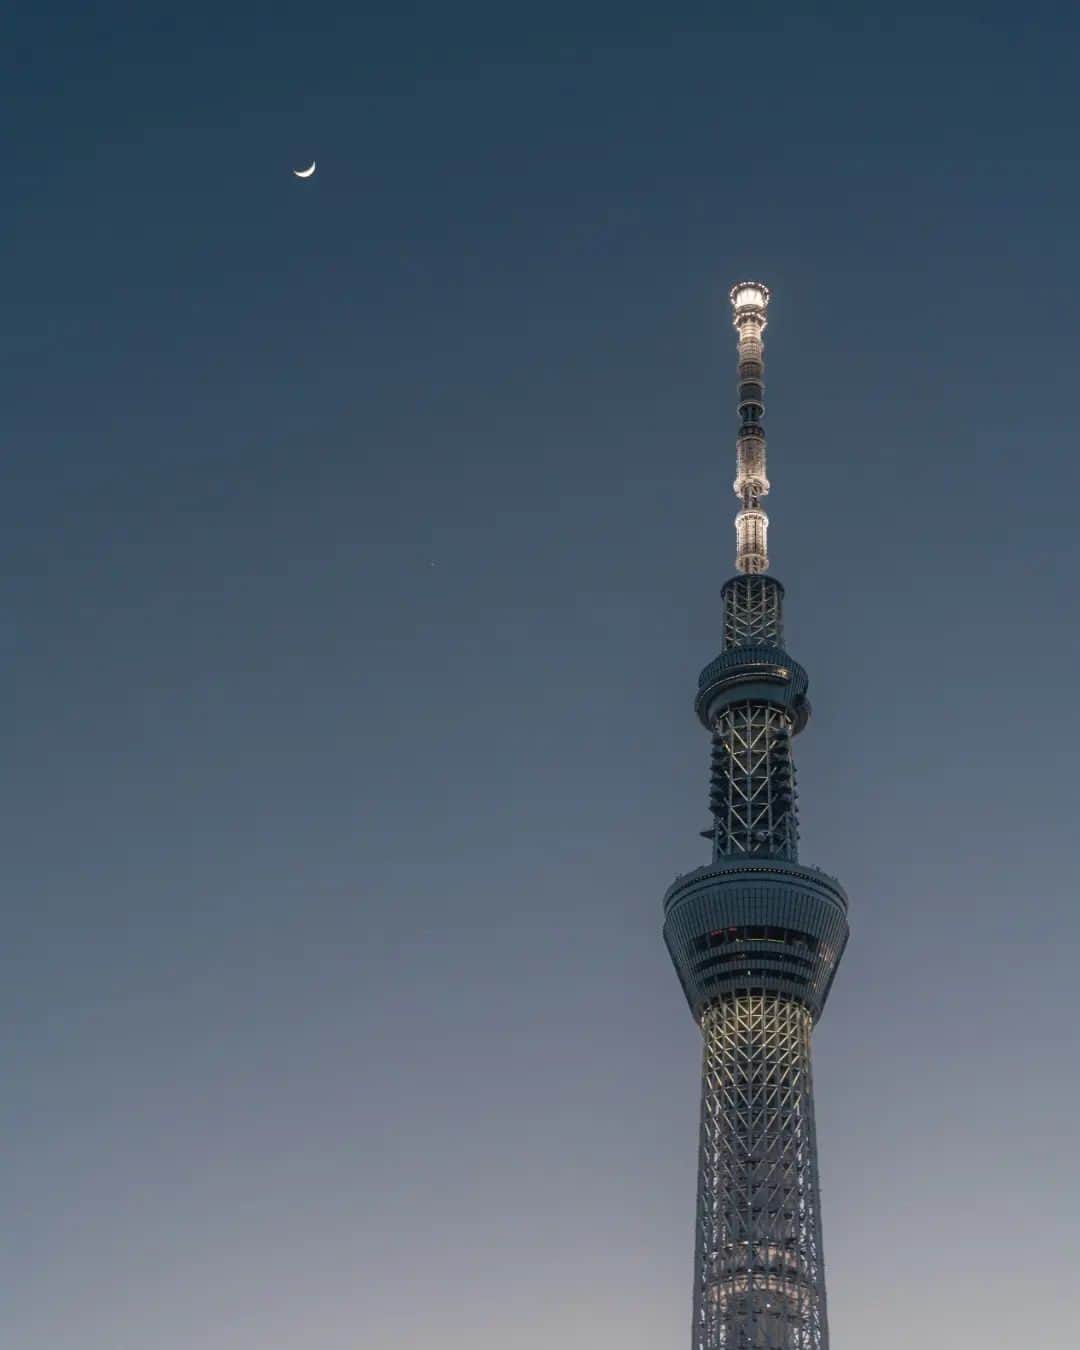 Joshのインスタグラム：「// Blue Skytree. I was originally going to use more photos I took this day for a reel, but I just now realized the video I took for the idea I had was on the stolen iPhone that didn't back up to the cloud.. Sad. All good - will just do an old fashion photo only post. Nothing particularly amazing about this spot, Jukken bridge, but it's funny to see how its popularity has forced them to put a sign there saying "No tripods". . Anyways, slowly working towards a photo guide has been fun, but there are just too many places to include. November is going to be a busy month ;) . . . . #japan #japaneseculture #visitjapan #visitjapanjp #visitjapanau #explorejapan #japantravel #tokyoweekender #matcha_jp #japanawaits #japan_vacations #discoverjapan #discovertokyo #japanlandscape #japanlife #tokyo #skytree #sunsetporn #twilightedits #sunsetcity」